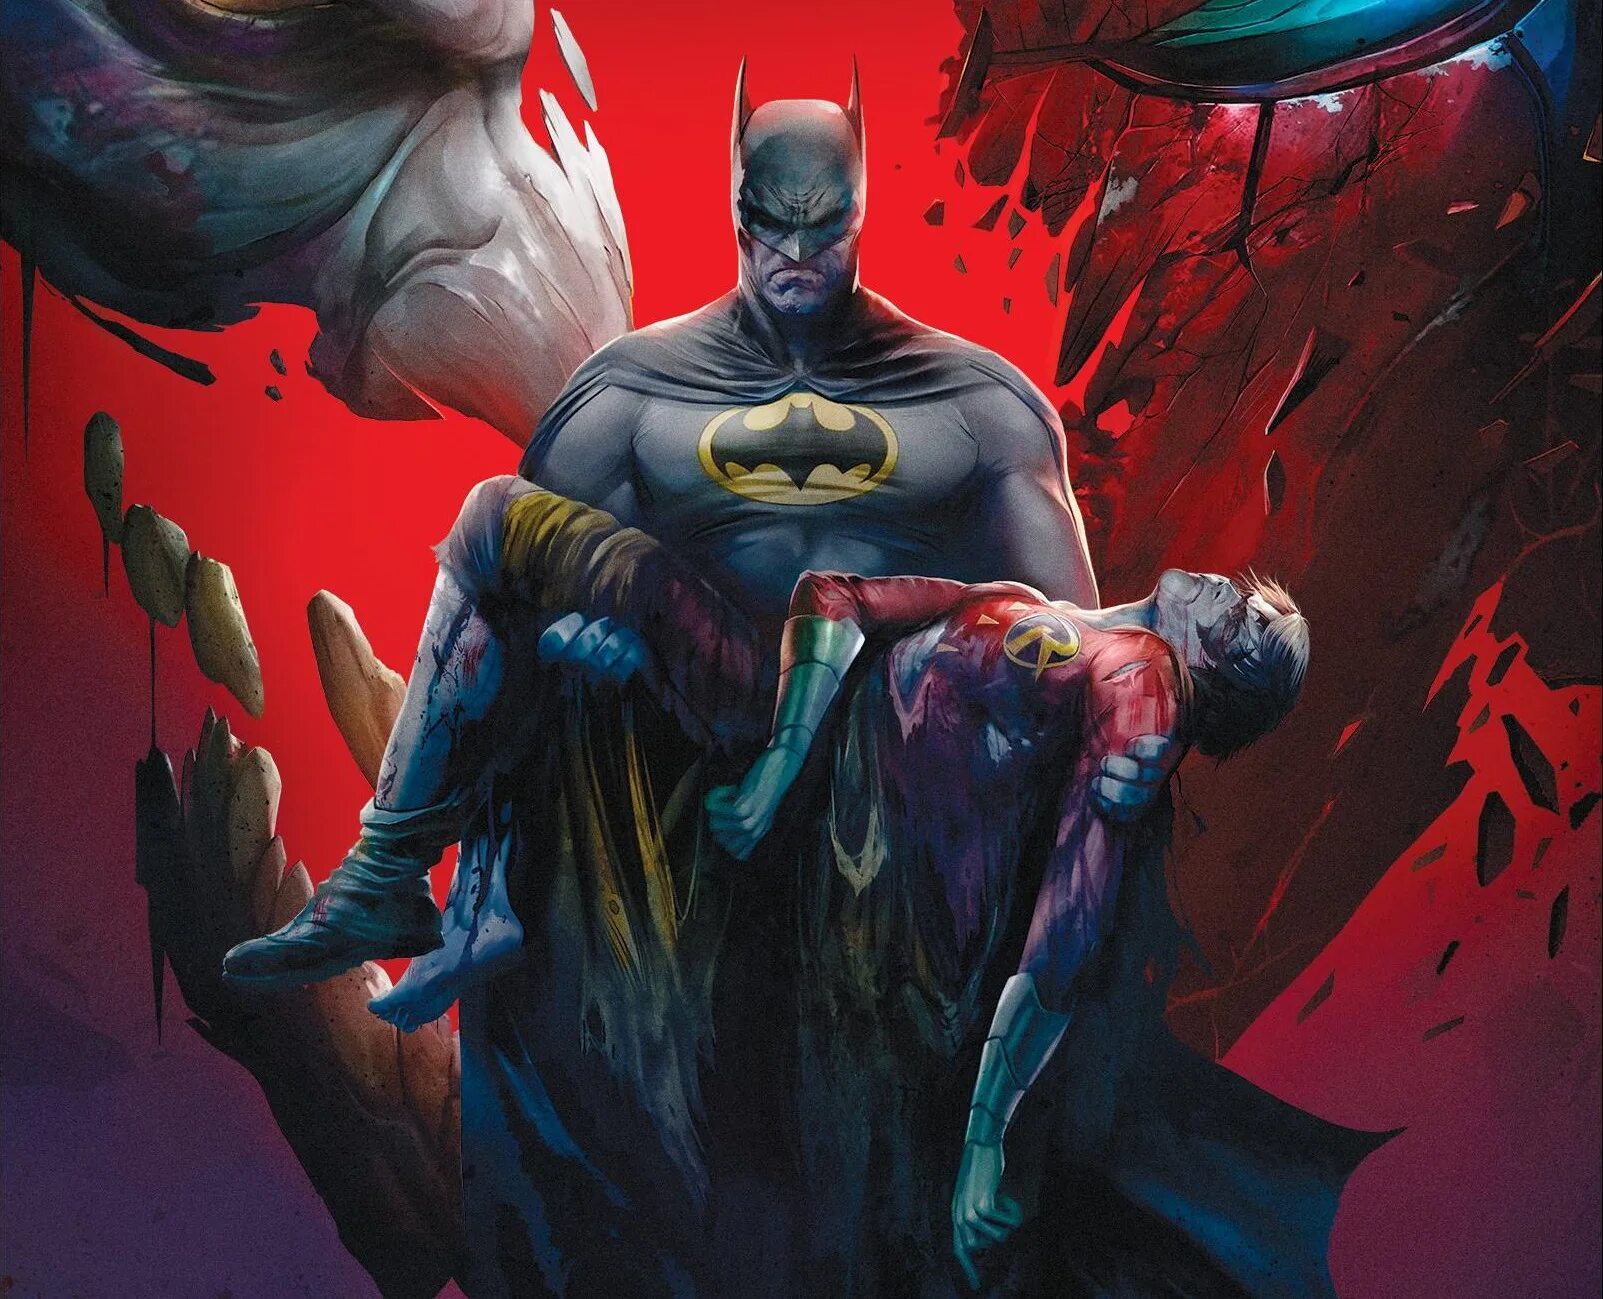 Batman Death in the Family 2020. Бэтмен Death in the Family Джокер. Batman death in the family